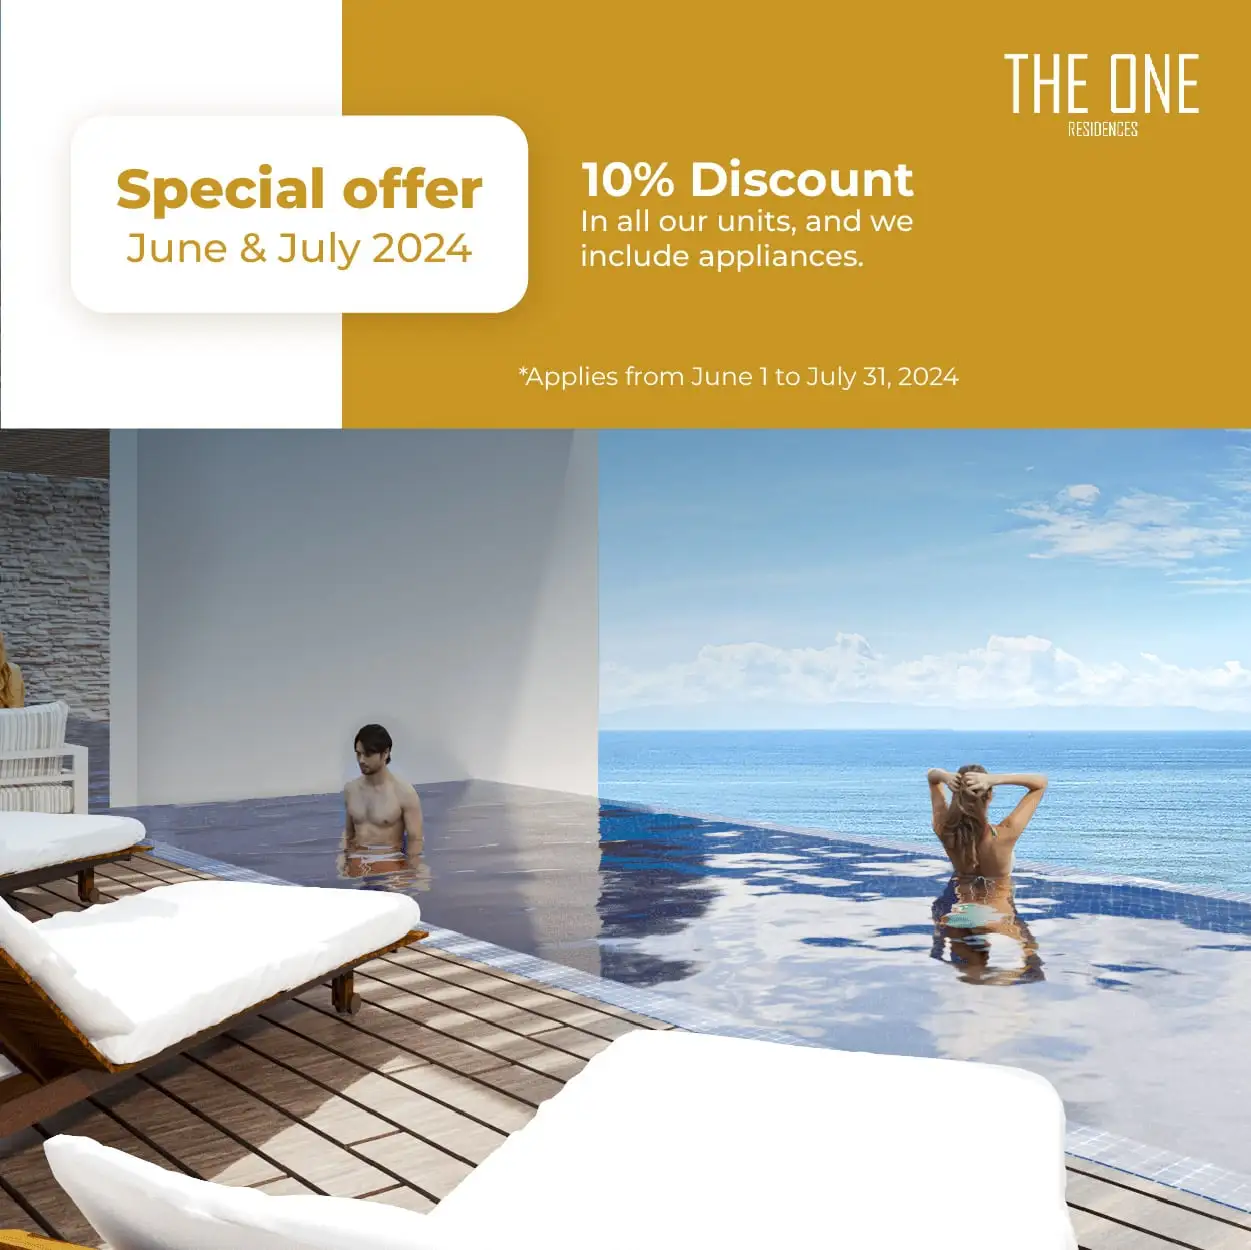 Promotion June & July The One Residences Bucerías